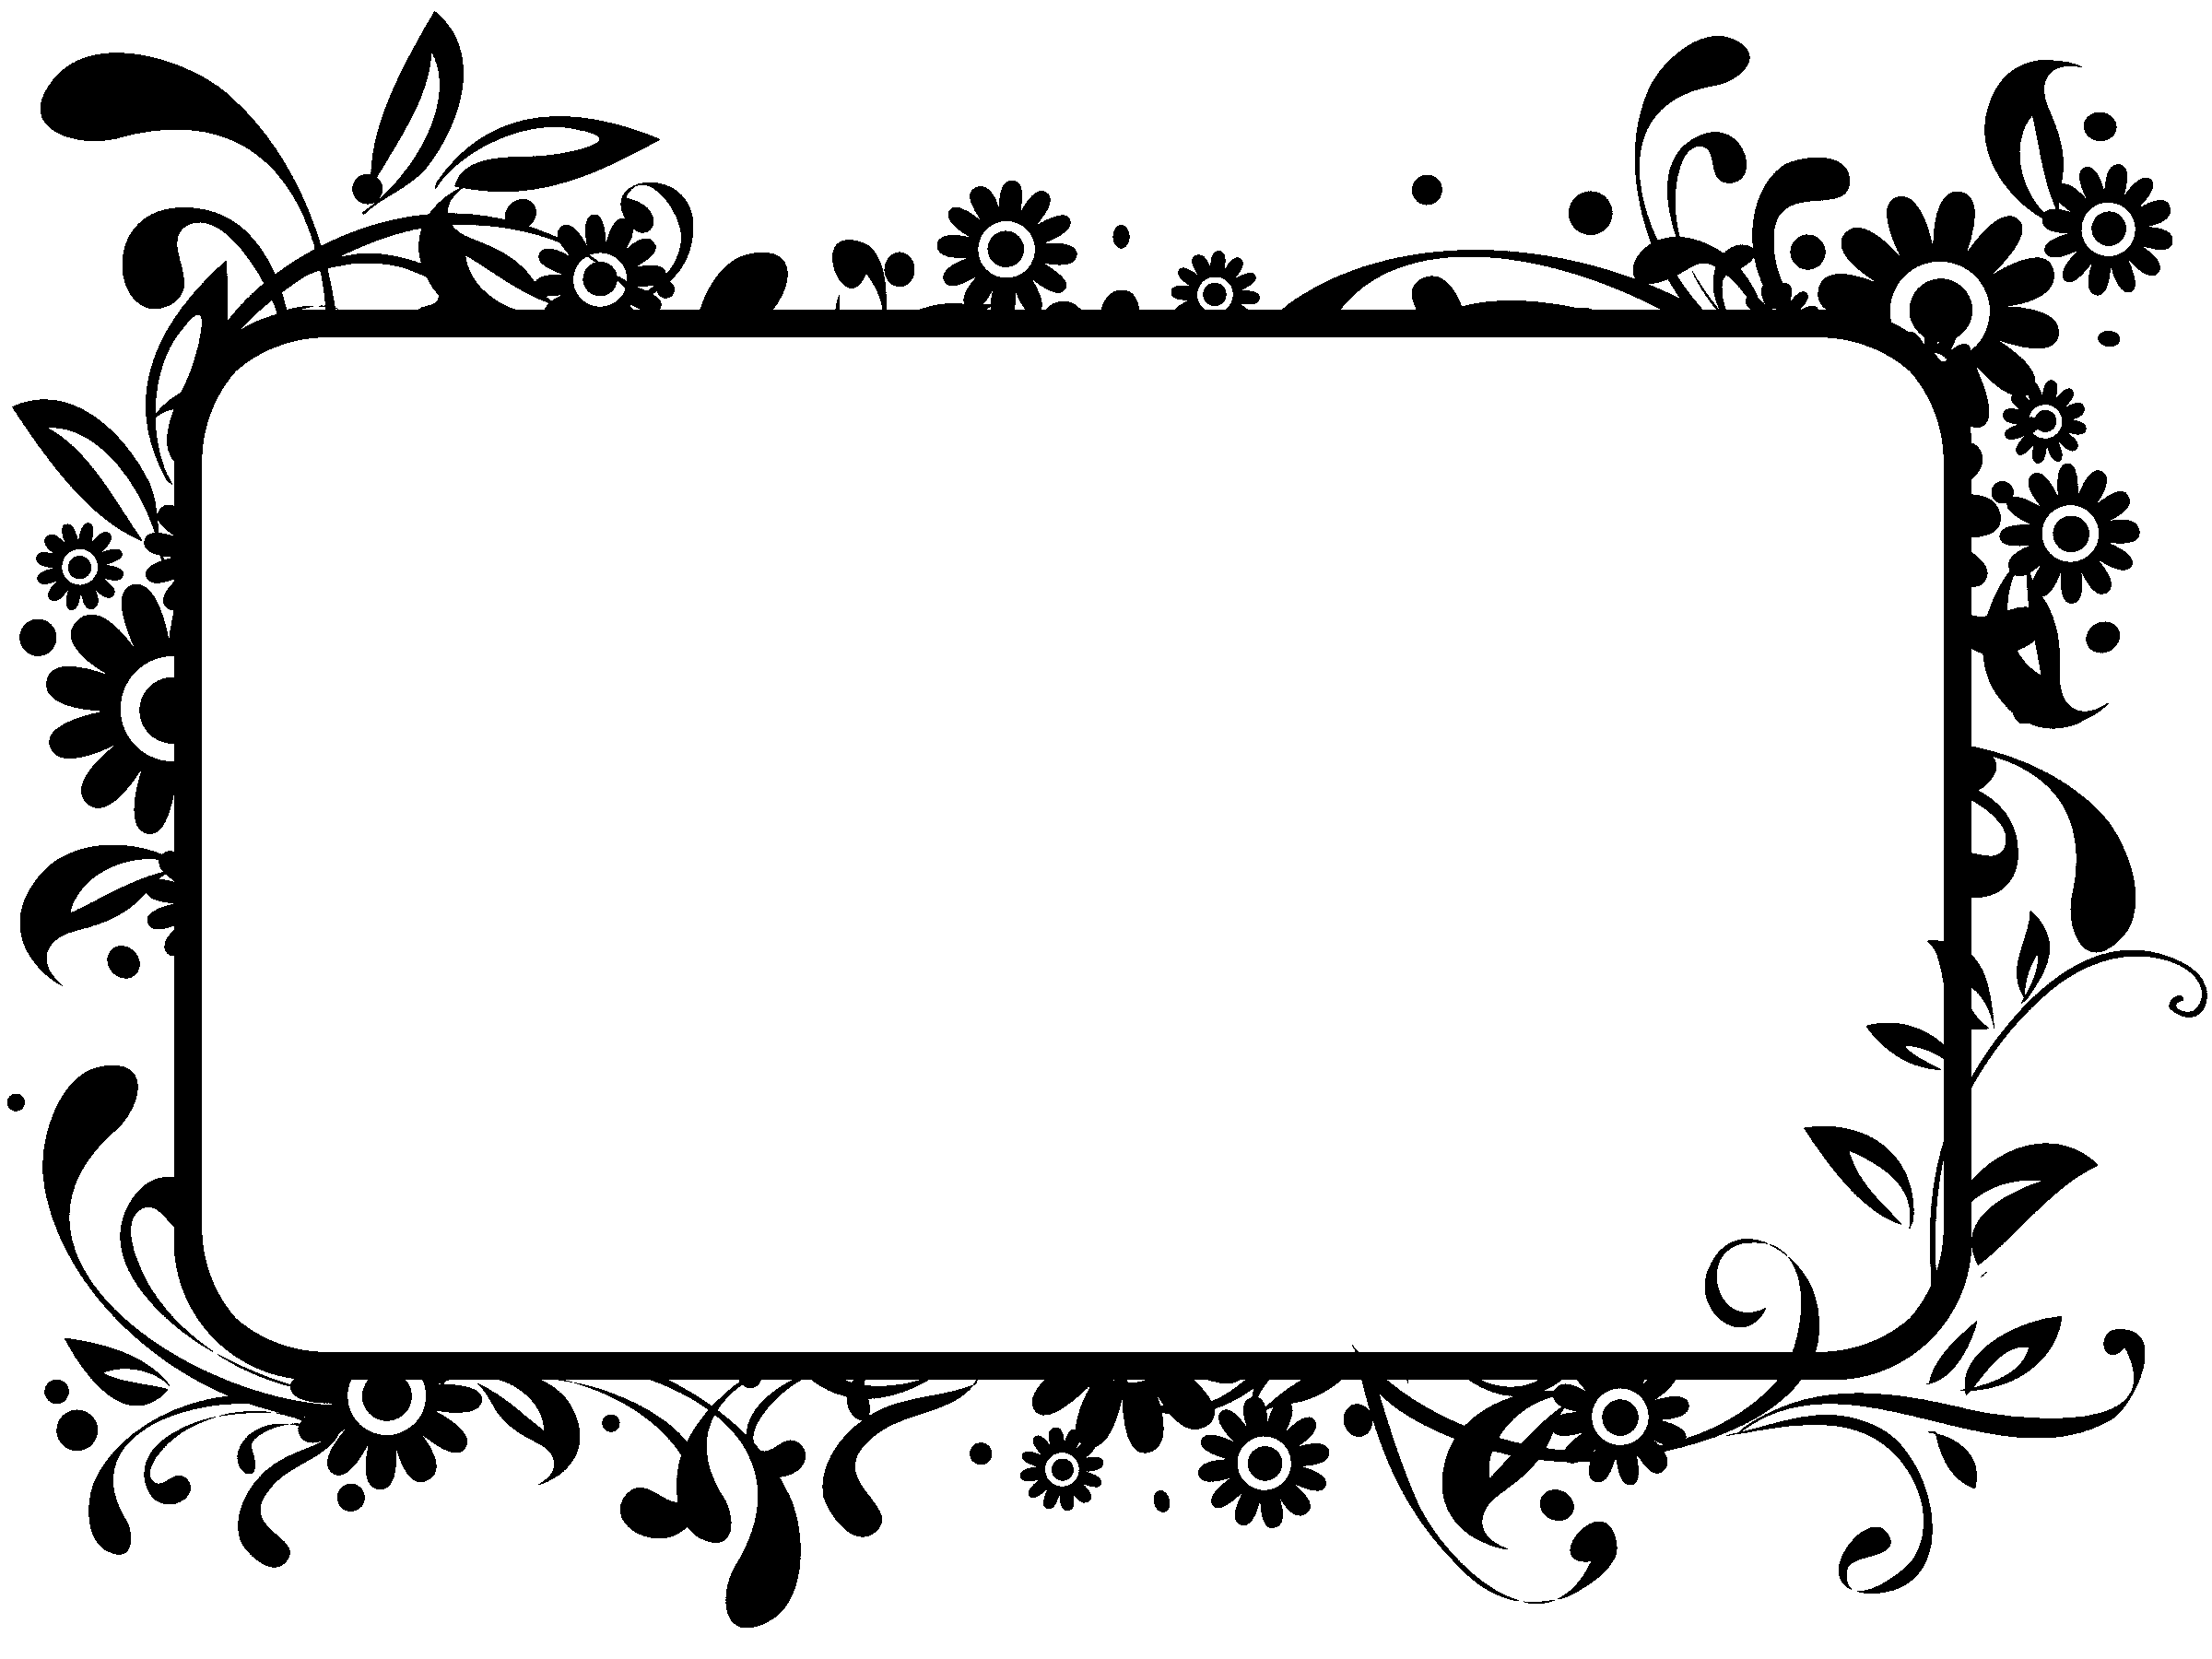 clipart frames and borders black and white - photo #42